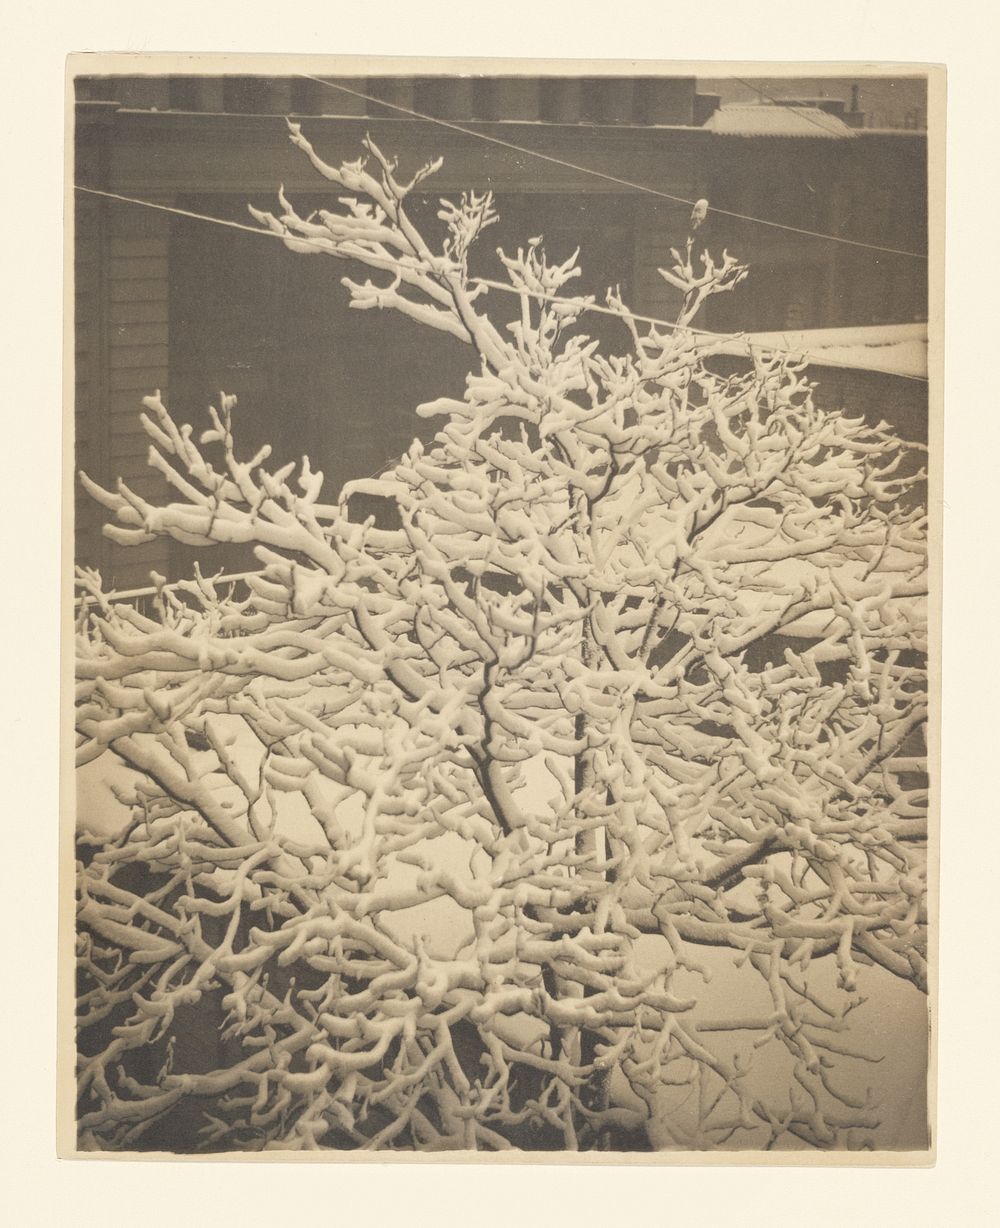 From the Back Window of 291 by Alfred Stieglitz